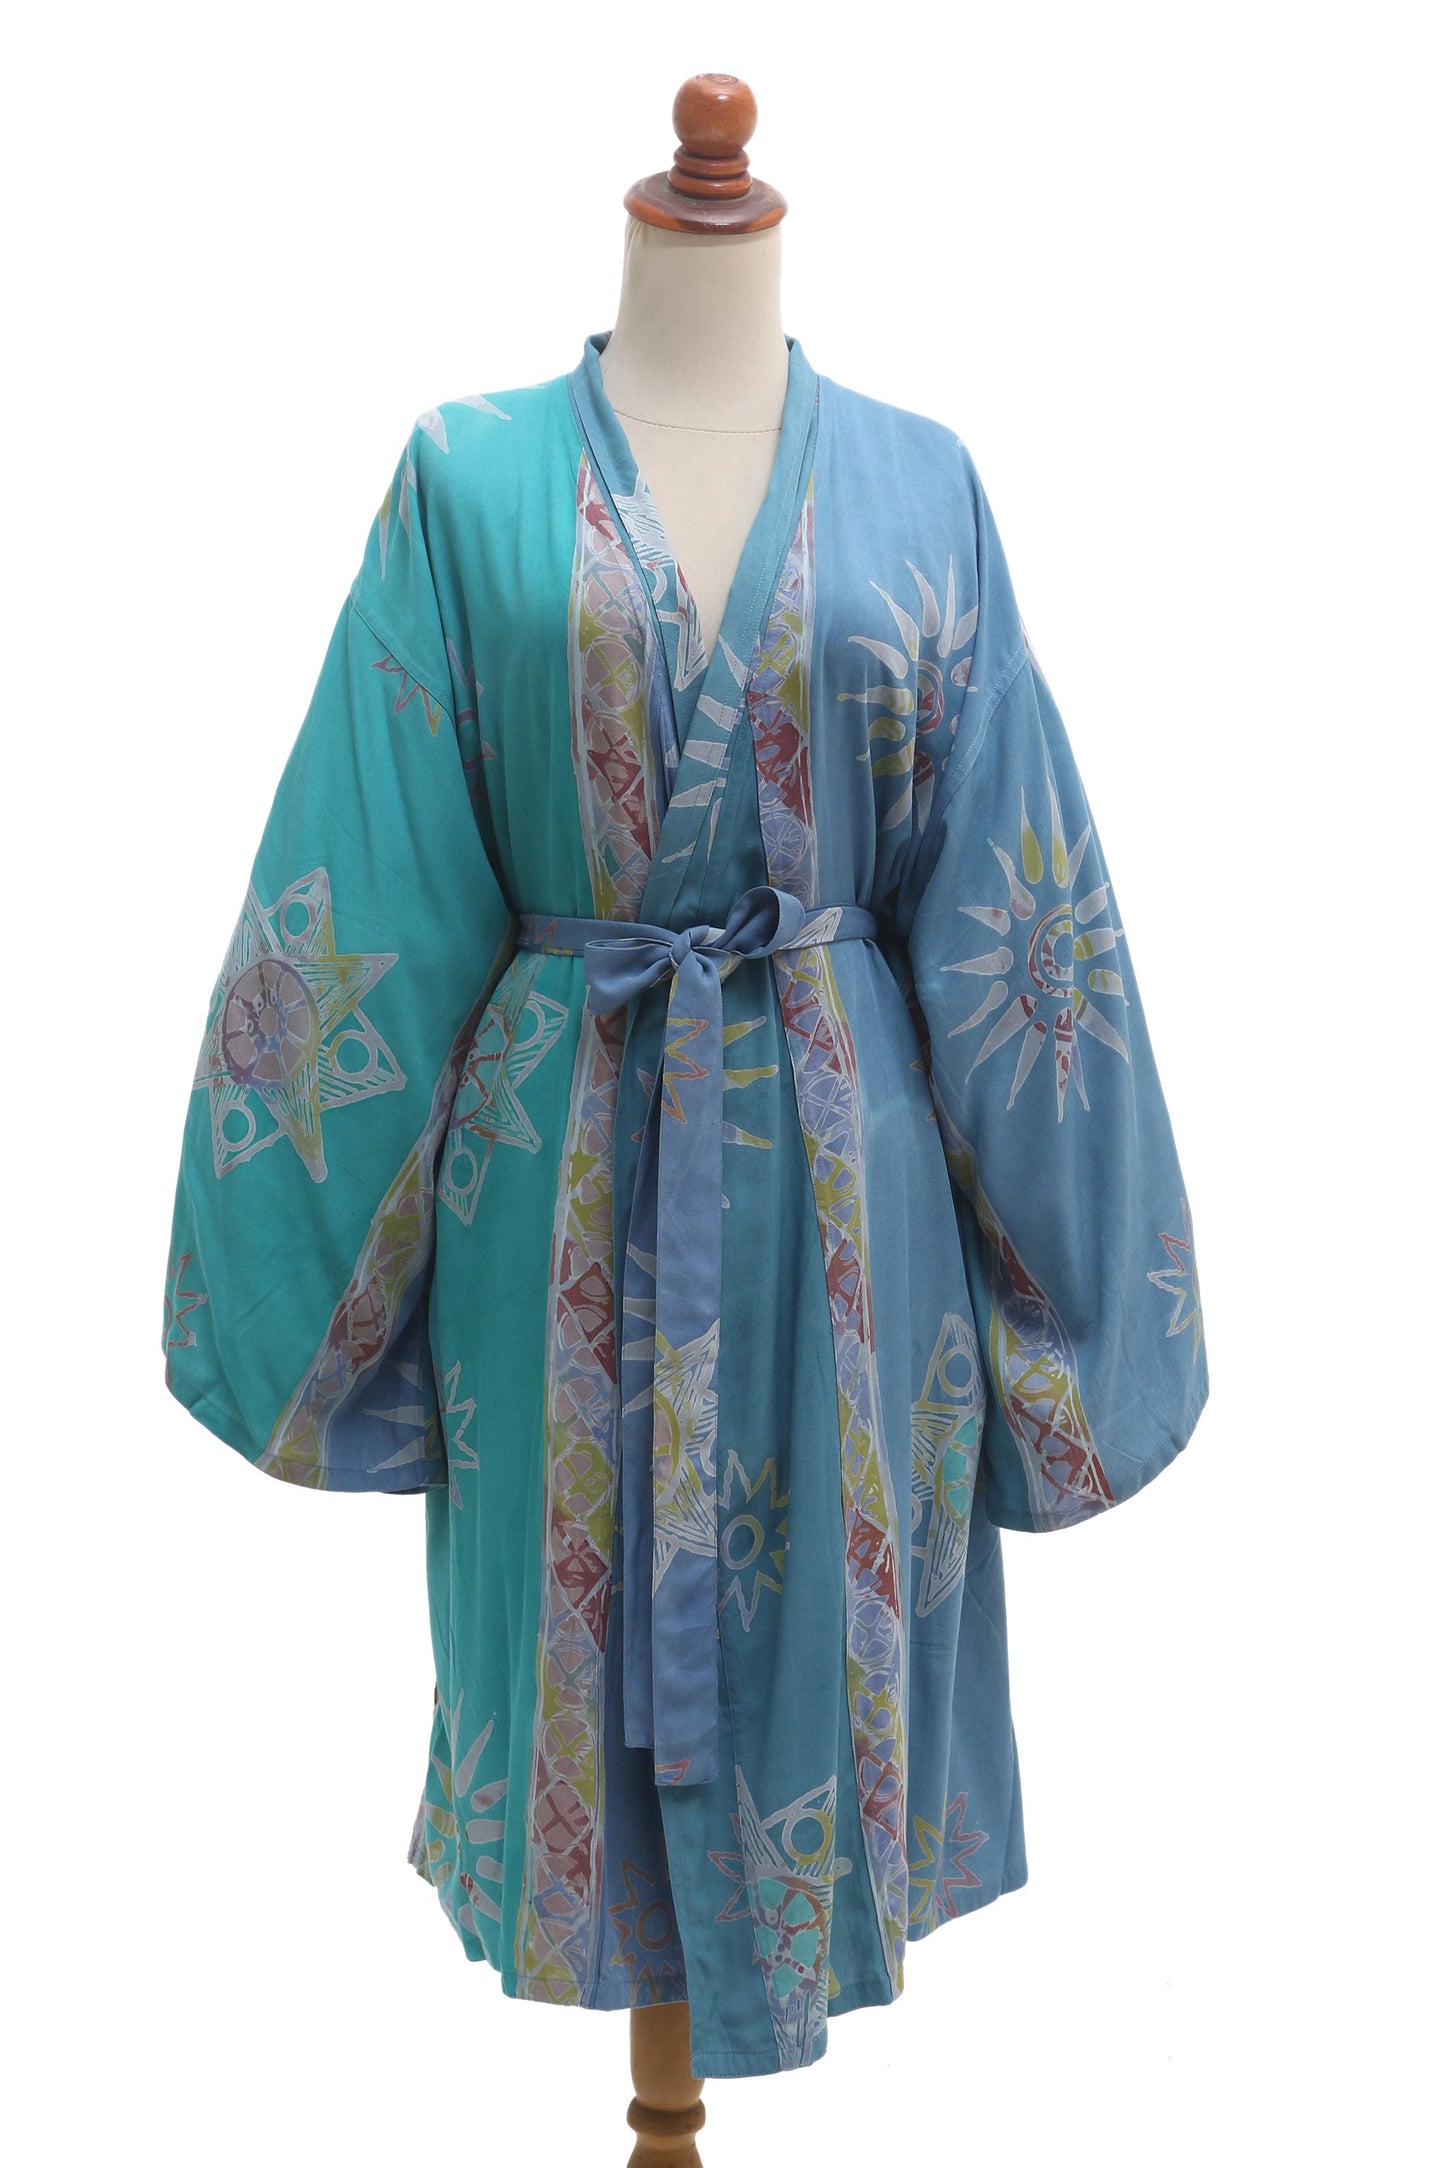 Remembrance Hand-Stamped Batik Rayon Robe from Bali